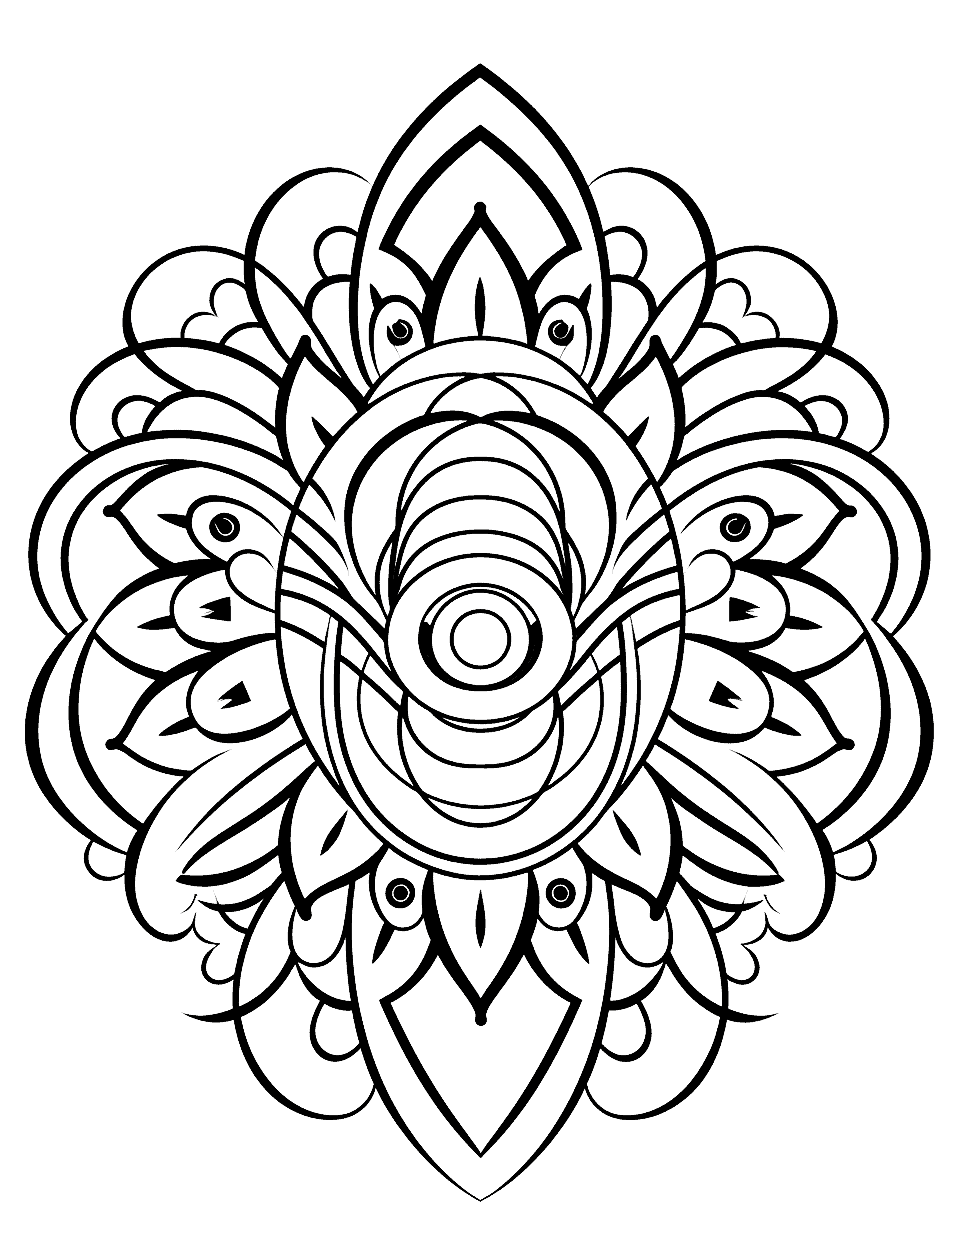 Vibrant Peacock Mandala Coloring Page - A beautiful, intricate mandala with a peacock and its majestic feathers at the center.